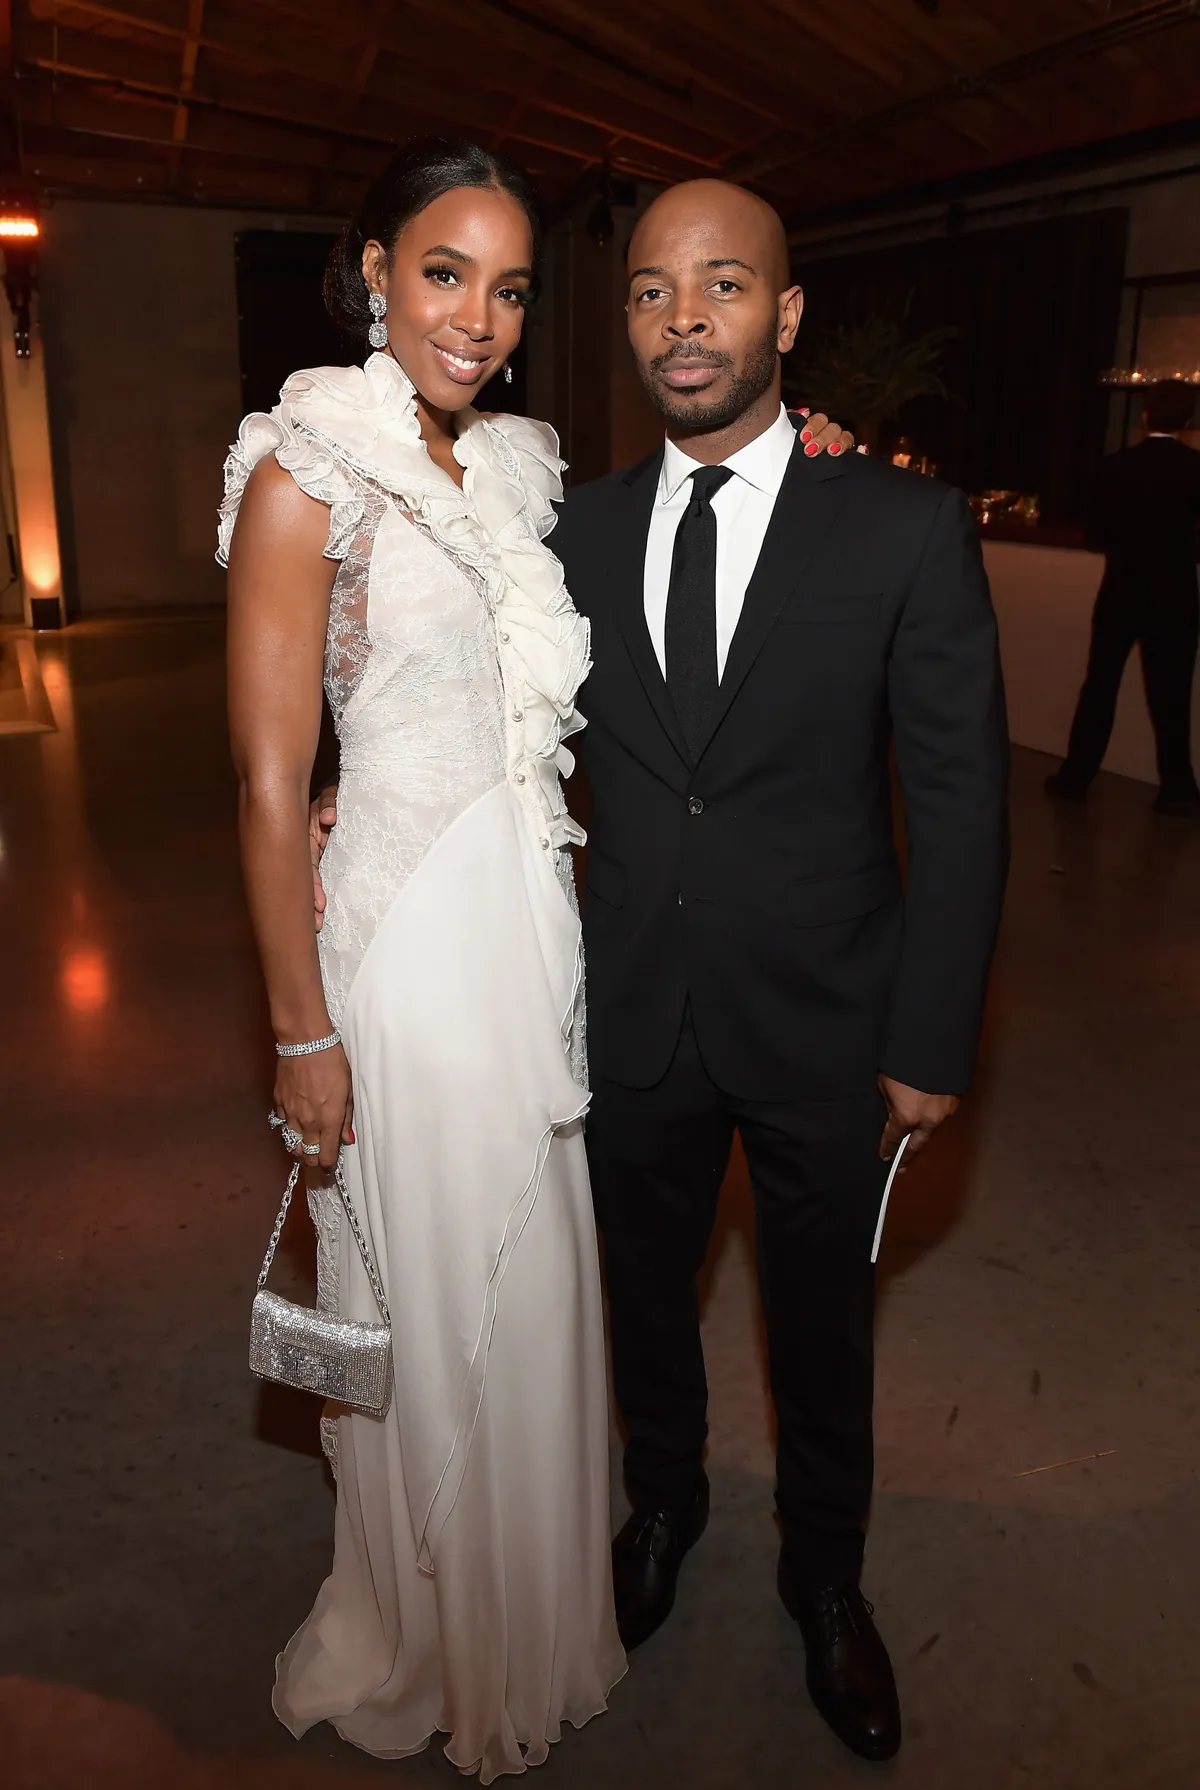 Kelly Rowland with husband Tim Weatherspoon at The 2017 Baby2Baby Gala presented by Paul Mitchell in Los Angeles, California. | Photo: Getty Images